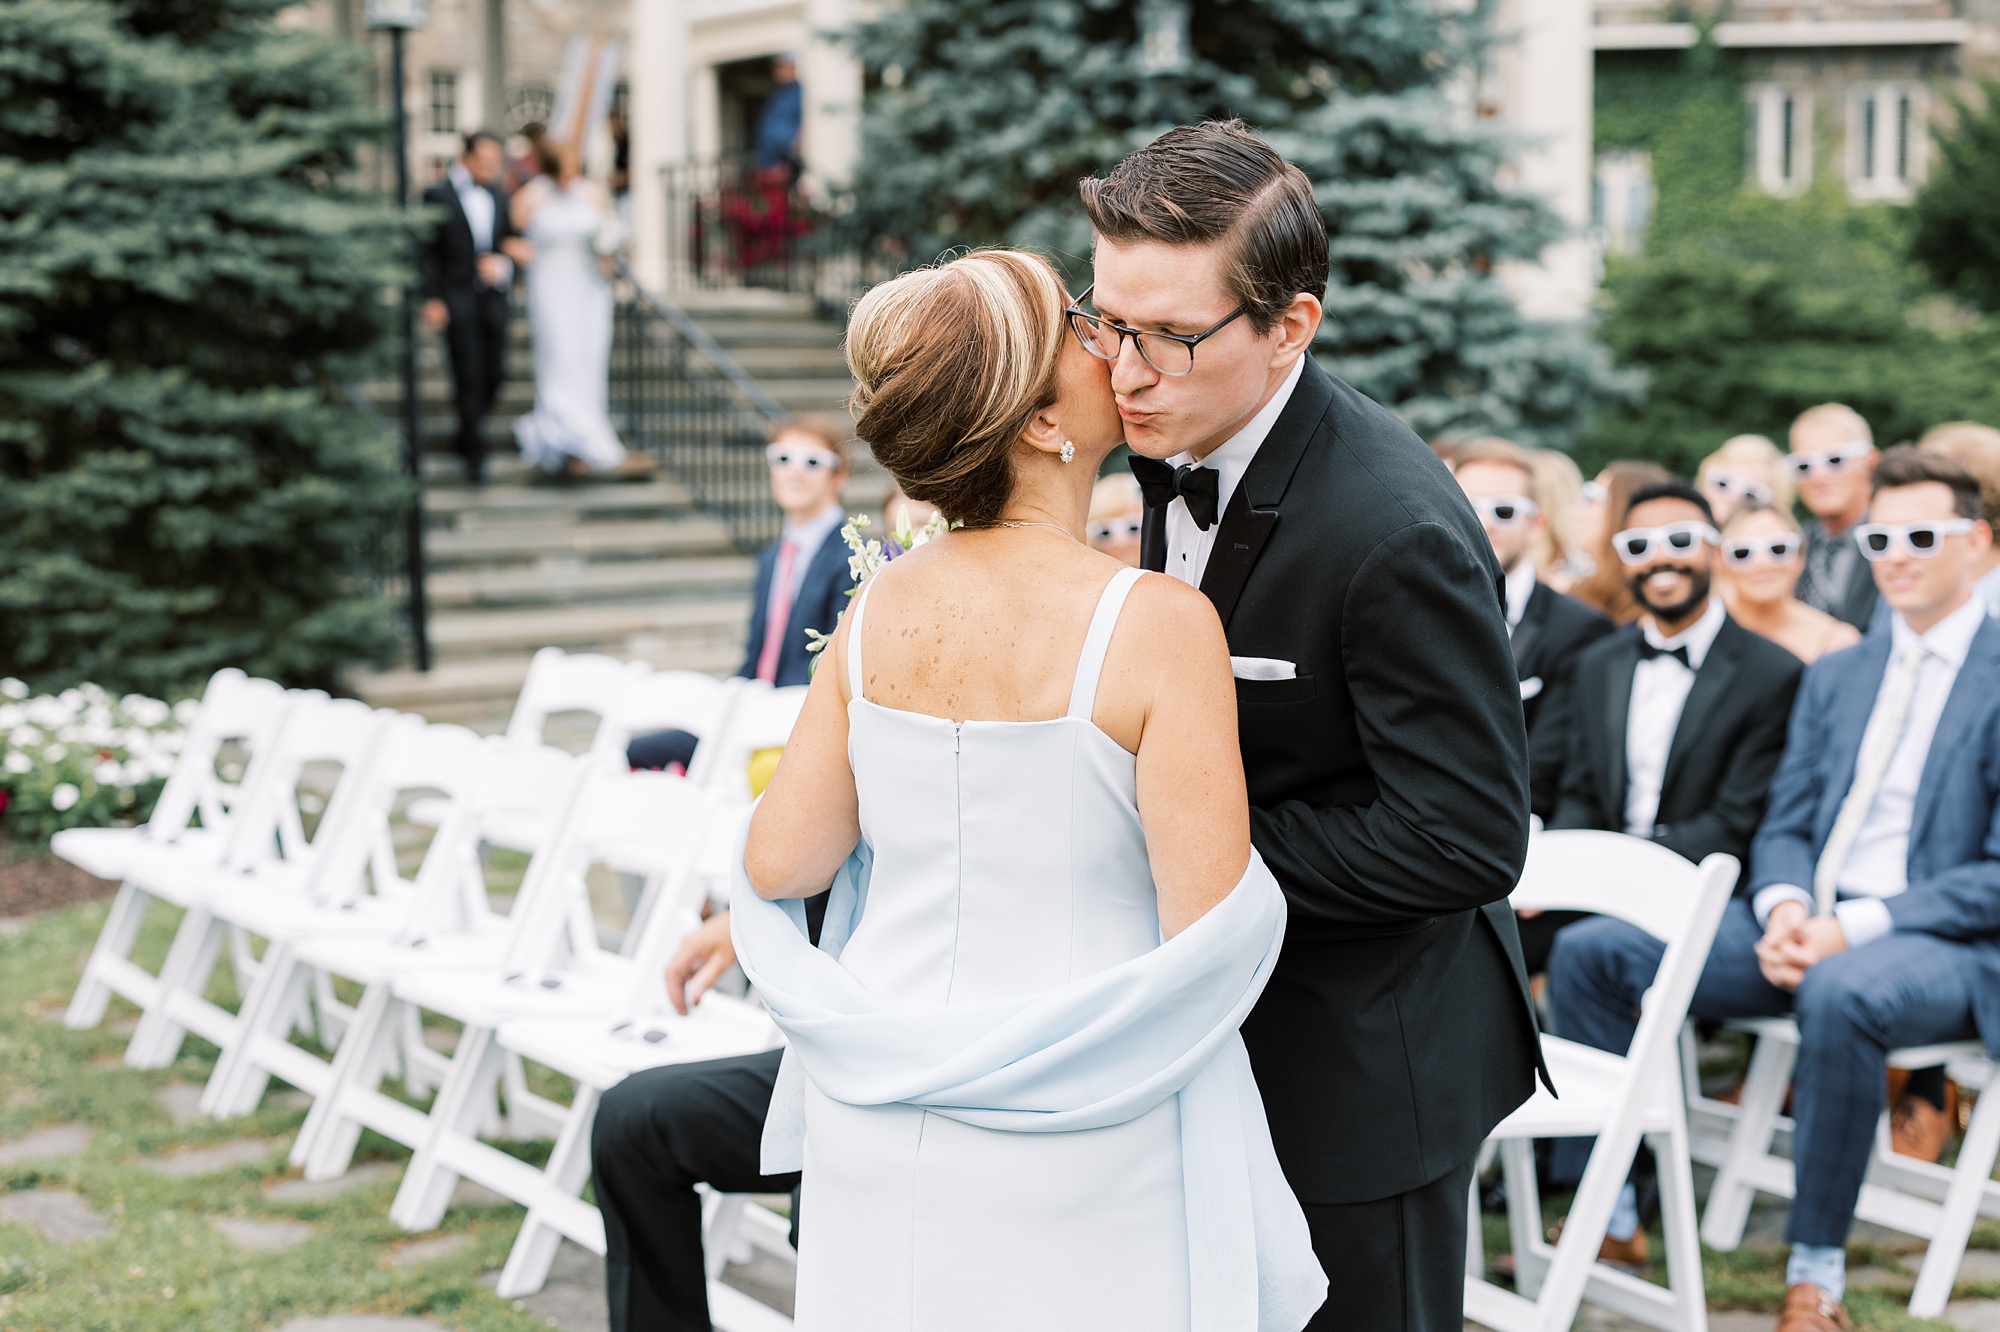 groom kisses mom's cheek during wedding ceremony on lawn at Skytop Lodge